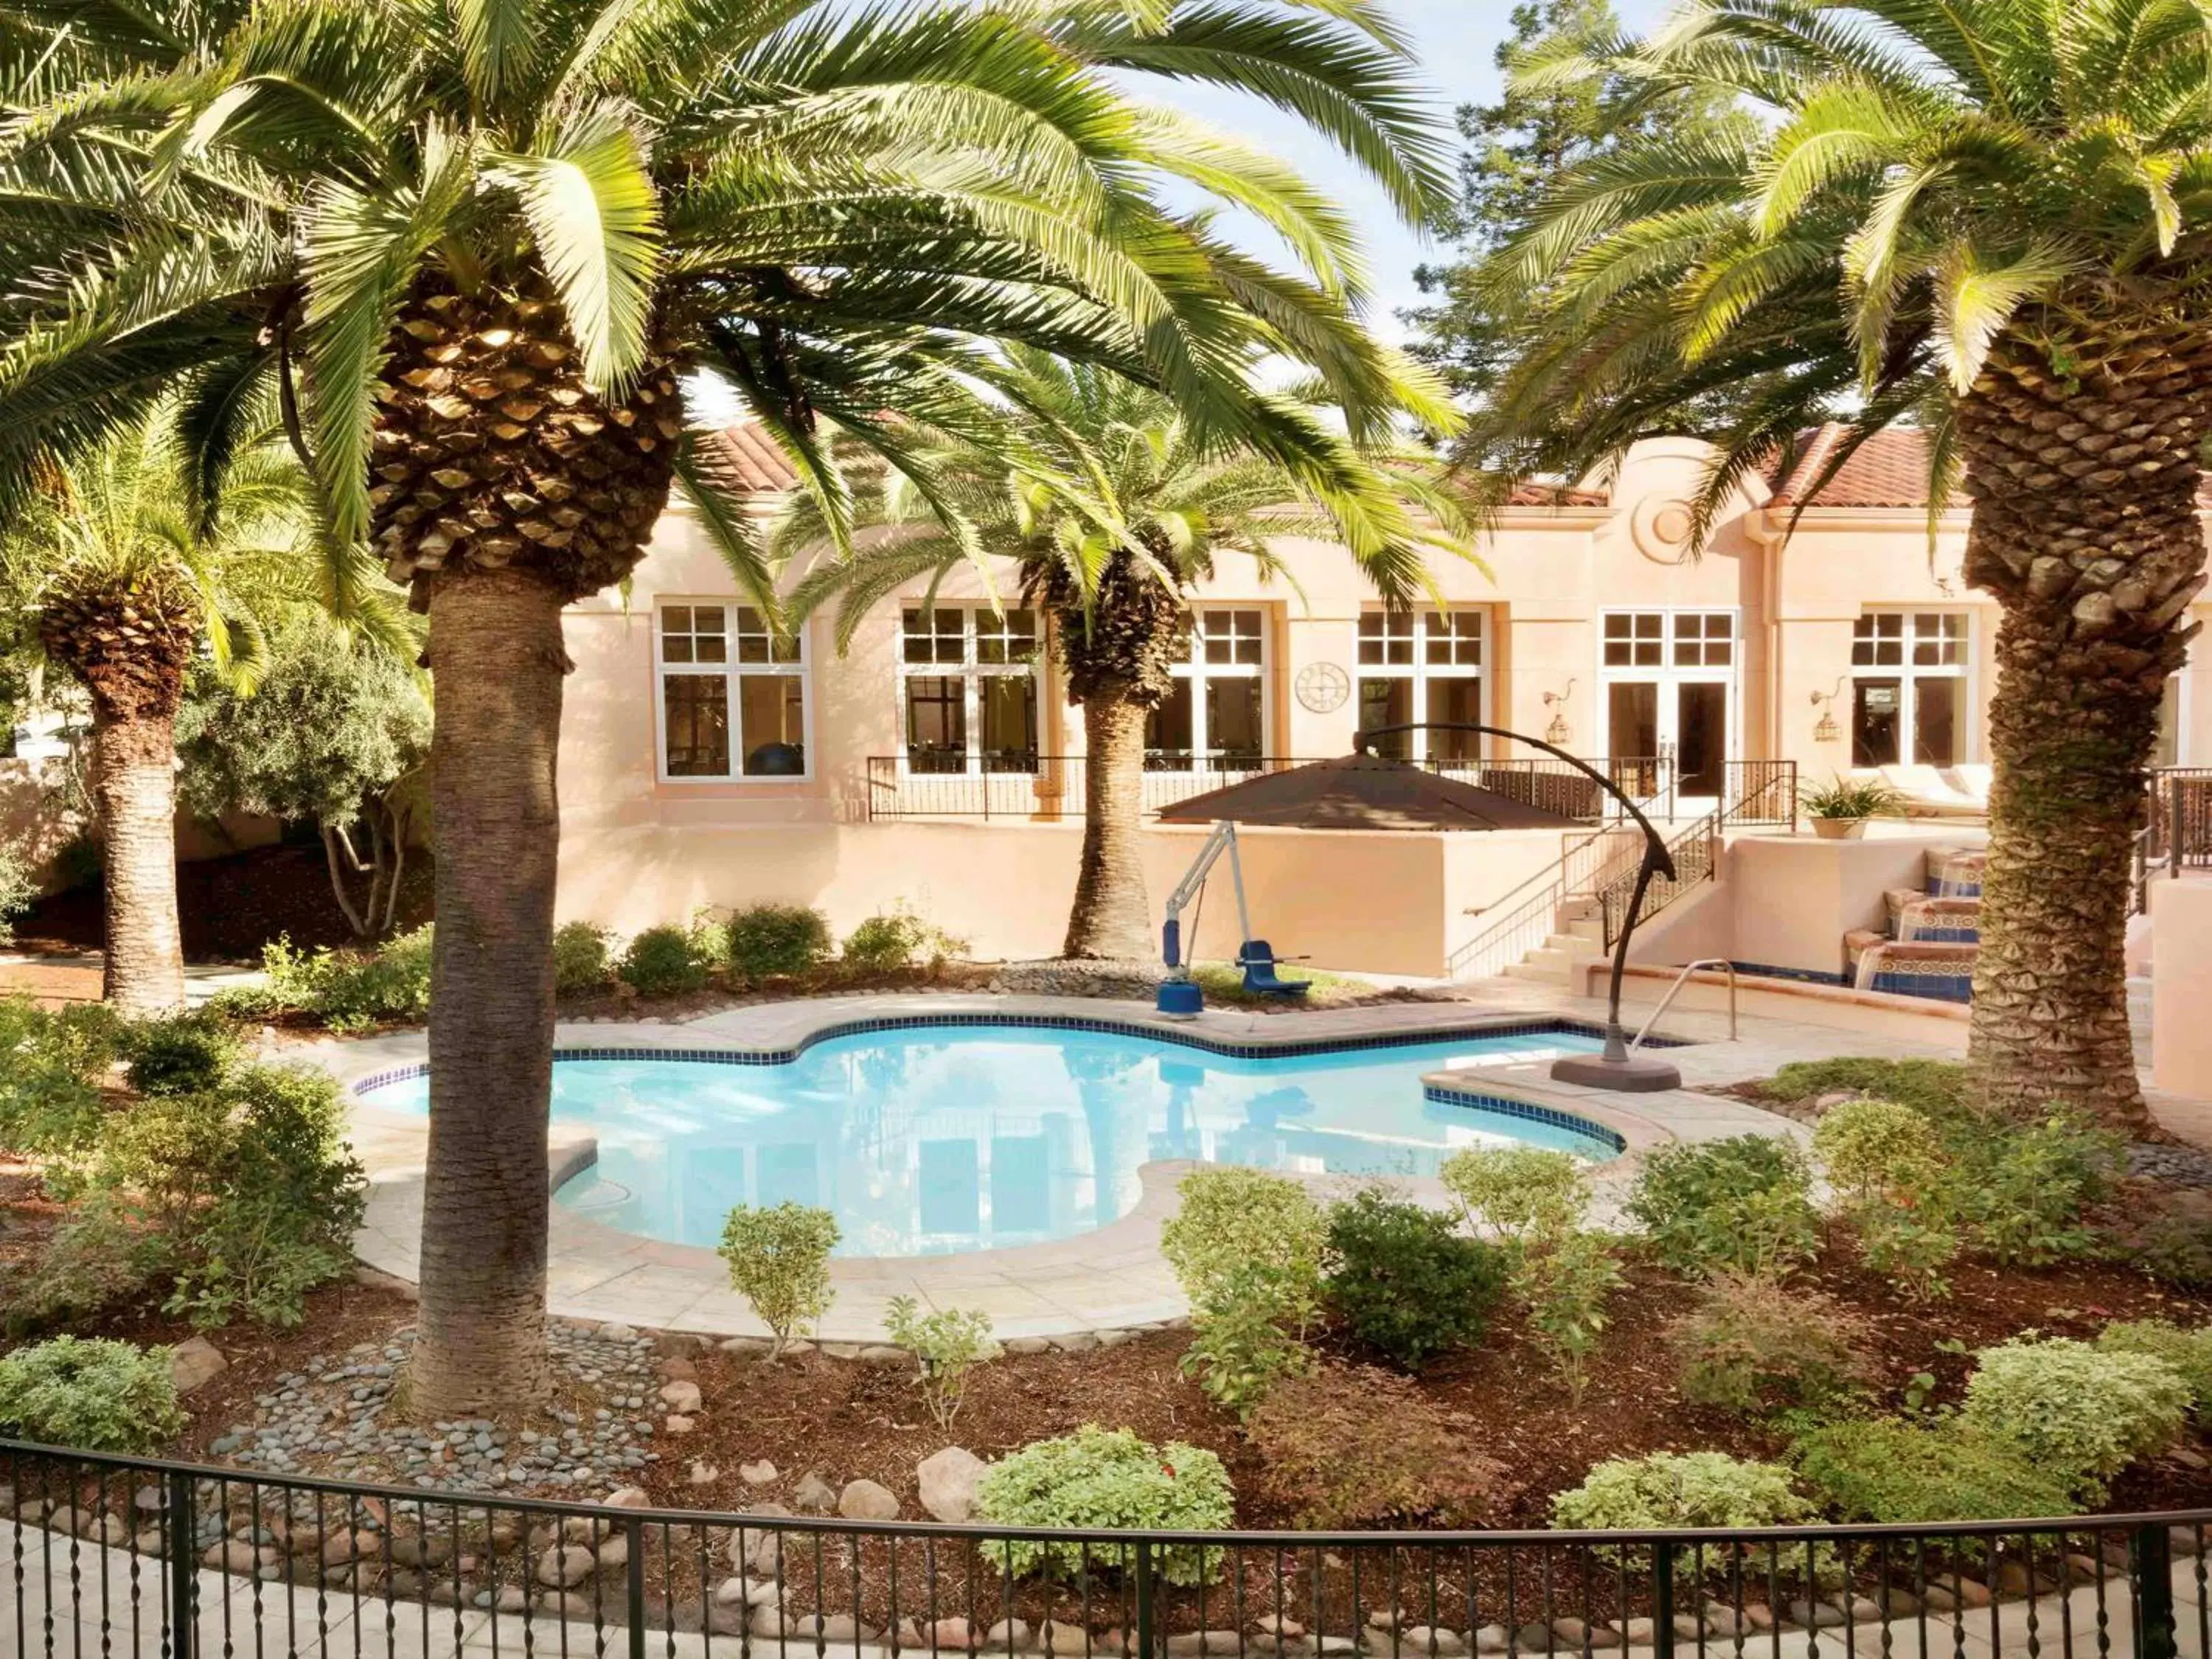 Spa and wellness centre/facilities, Swimming Pool in Fairmont Sonoma Mission Inn & Spa